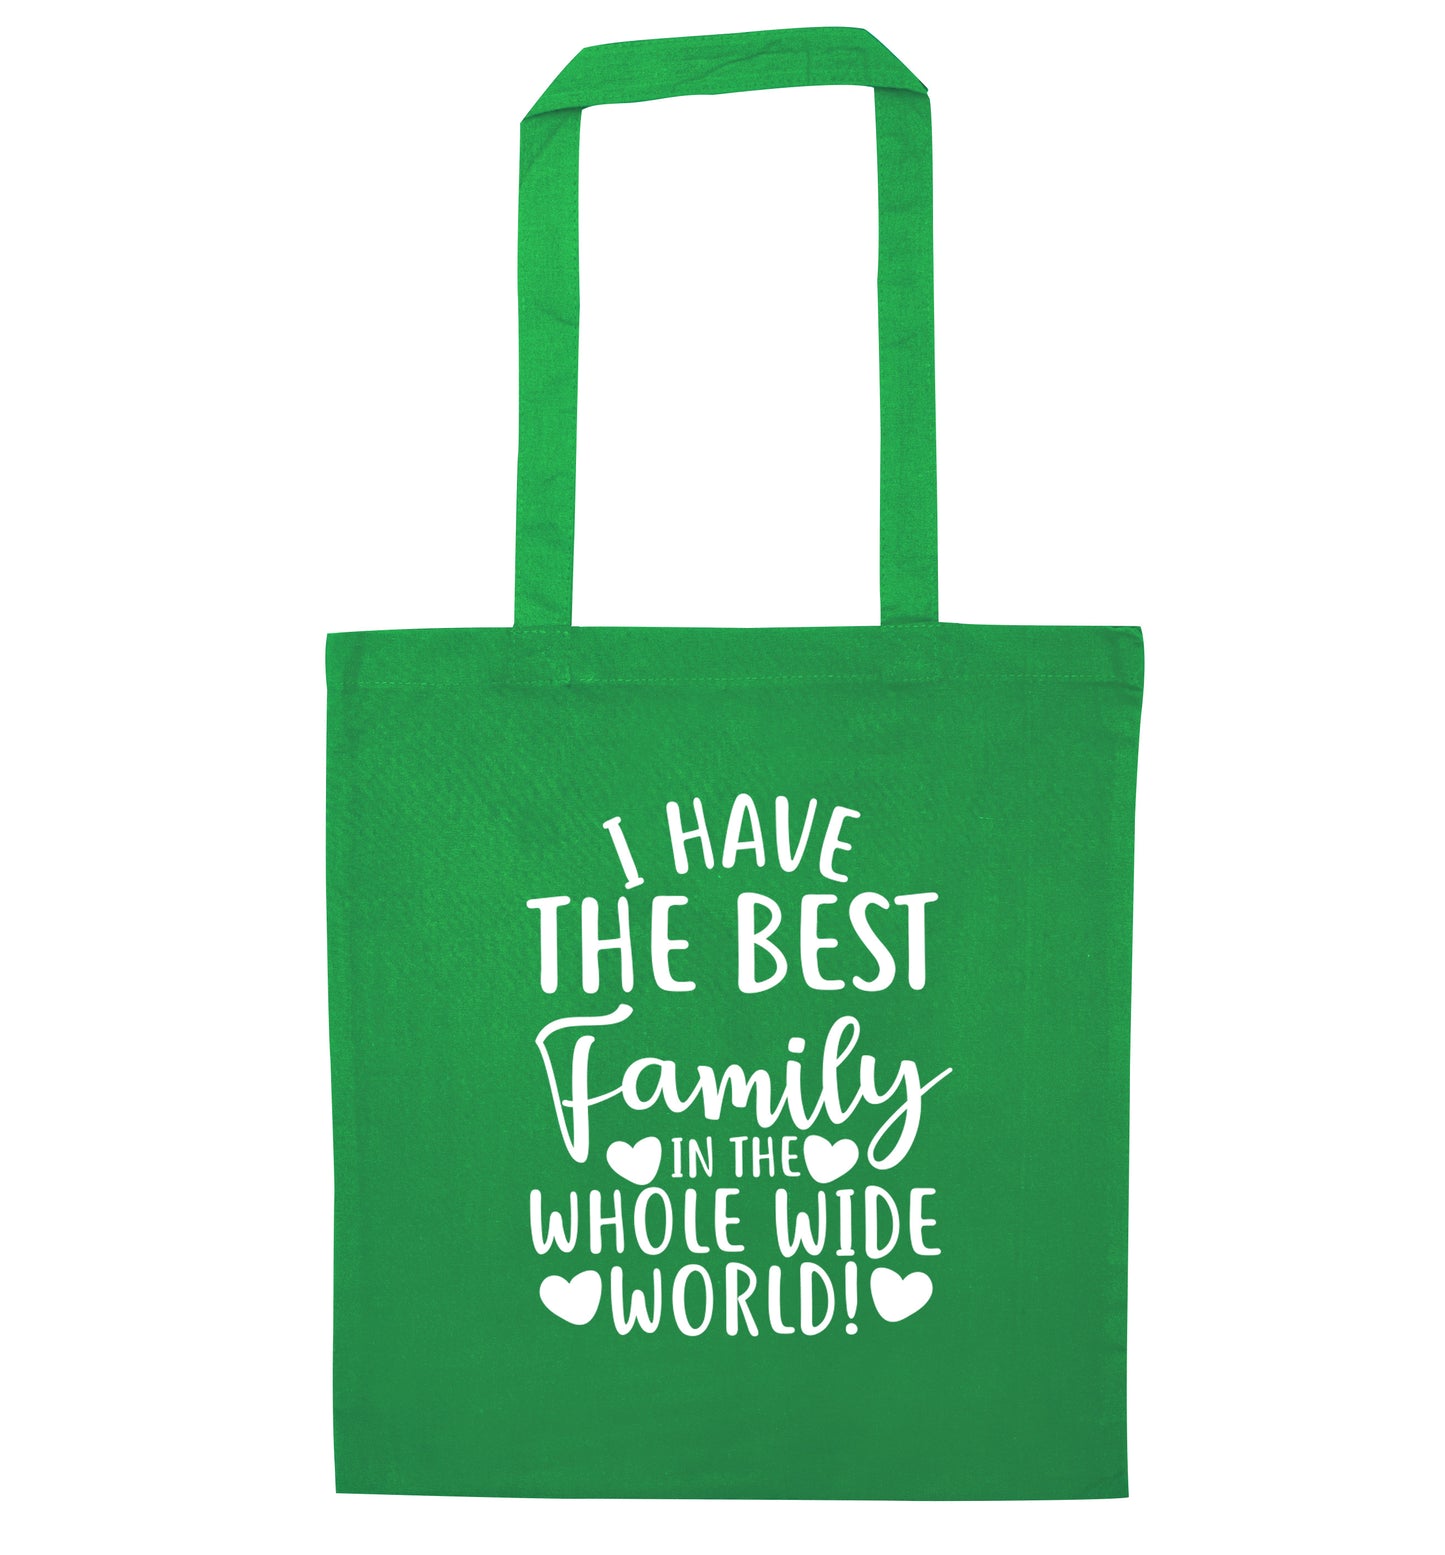 I have the best family in the whole wide world! green tote bag